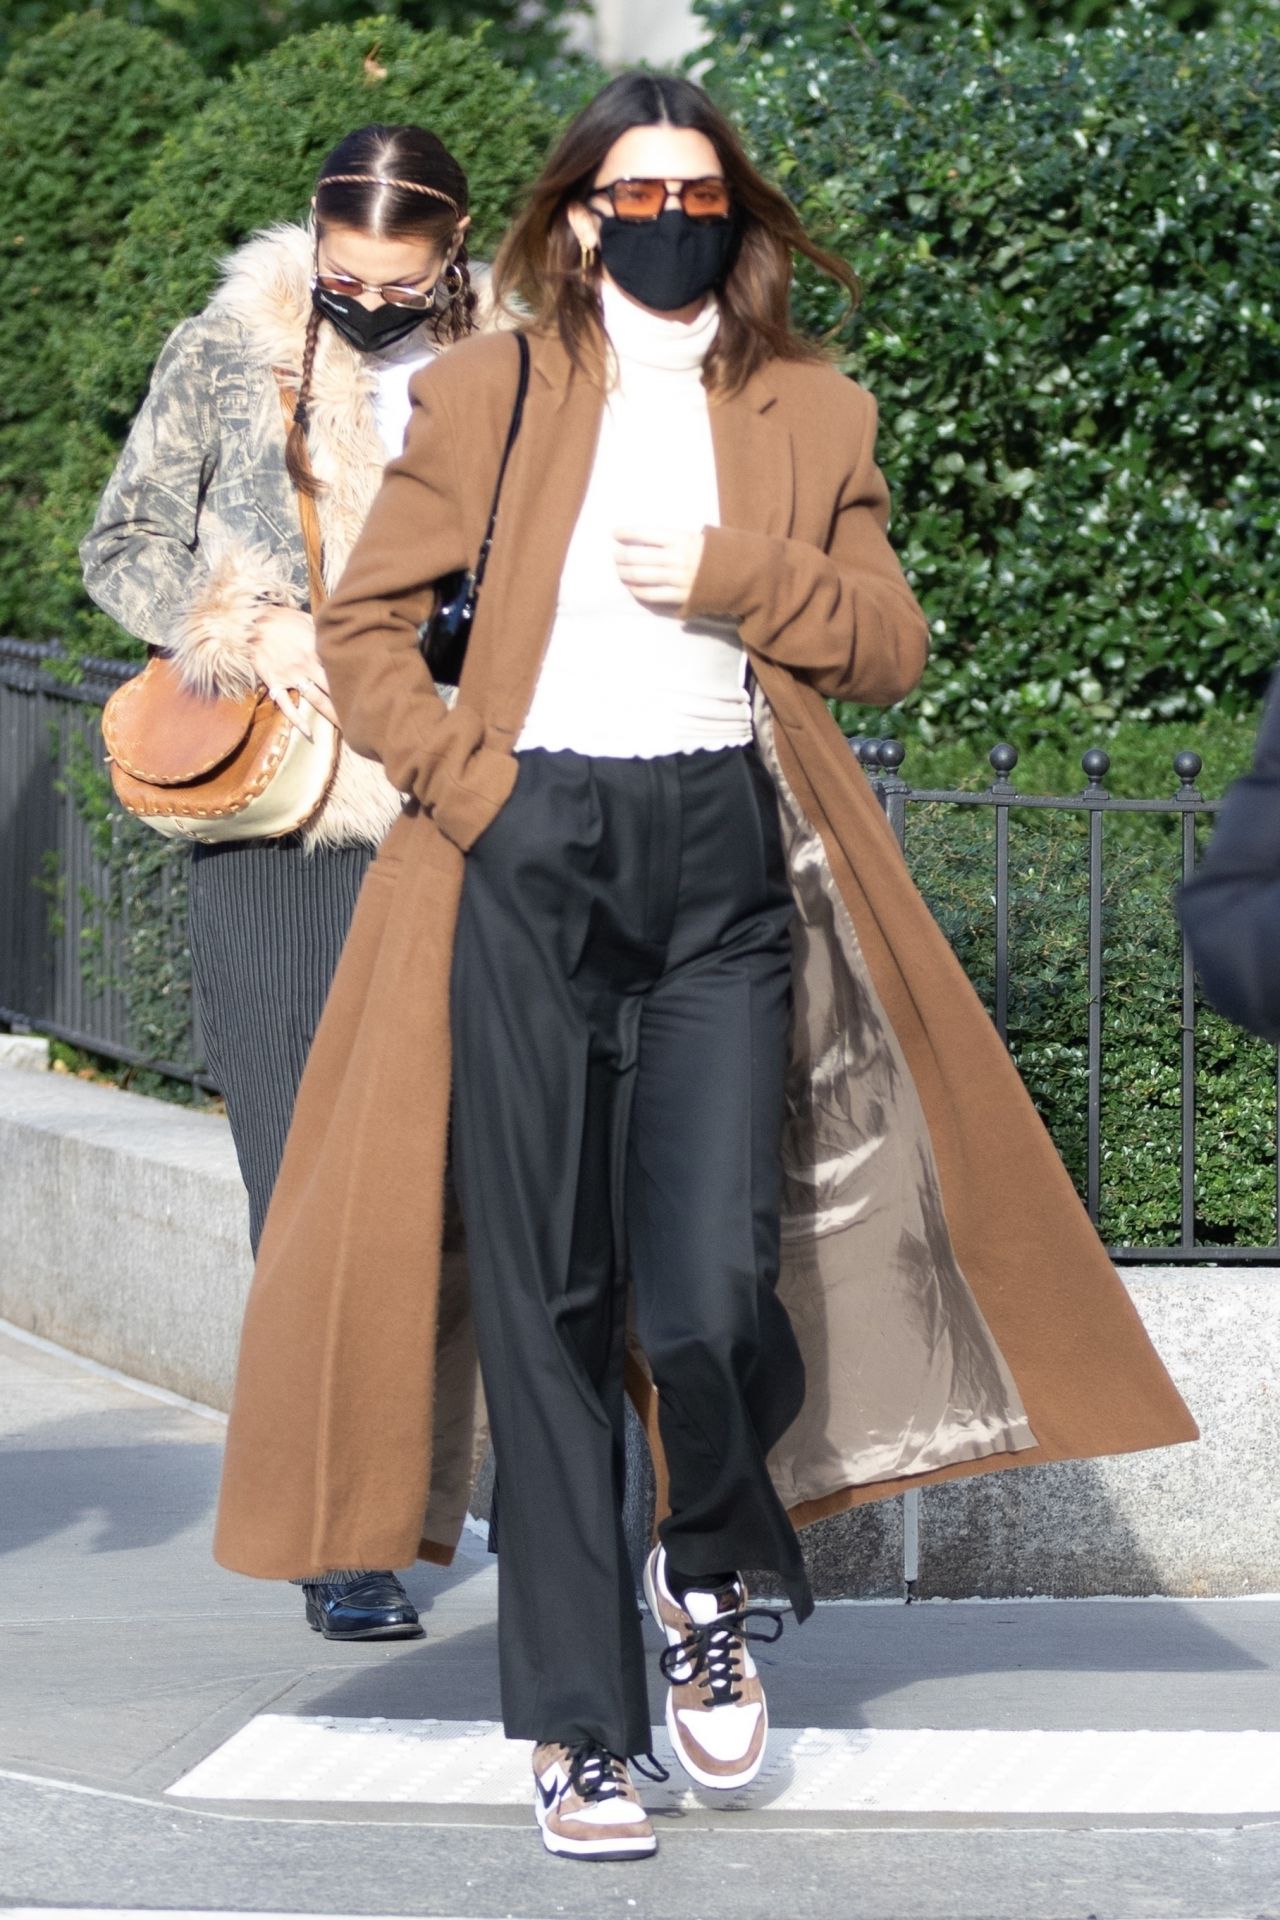 Kendall Jenner out in NYC November 16, 2019 – Star Style